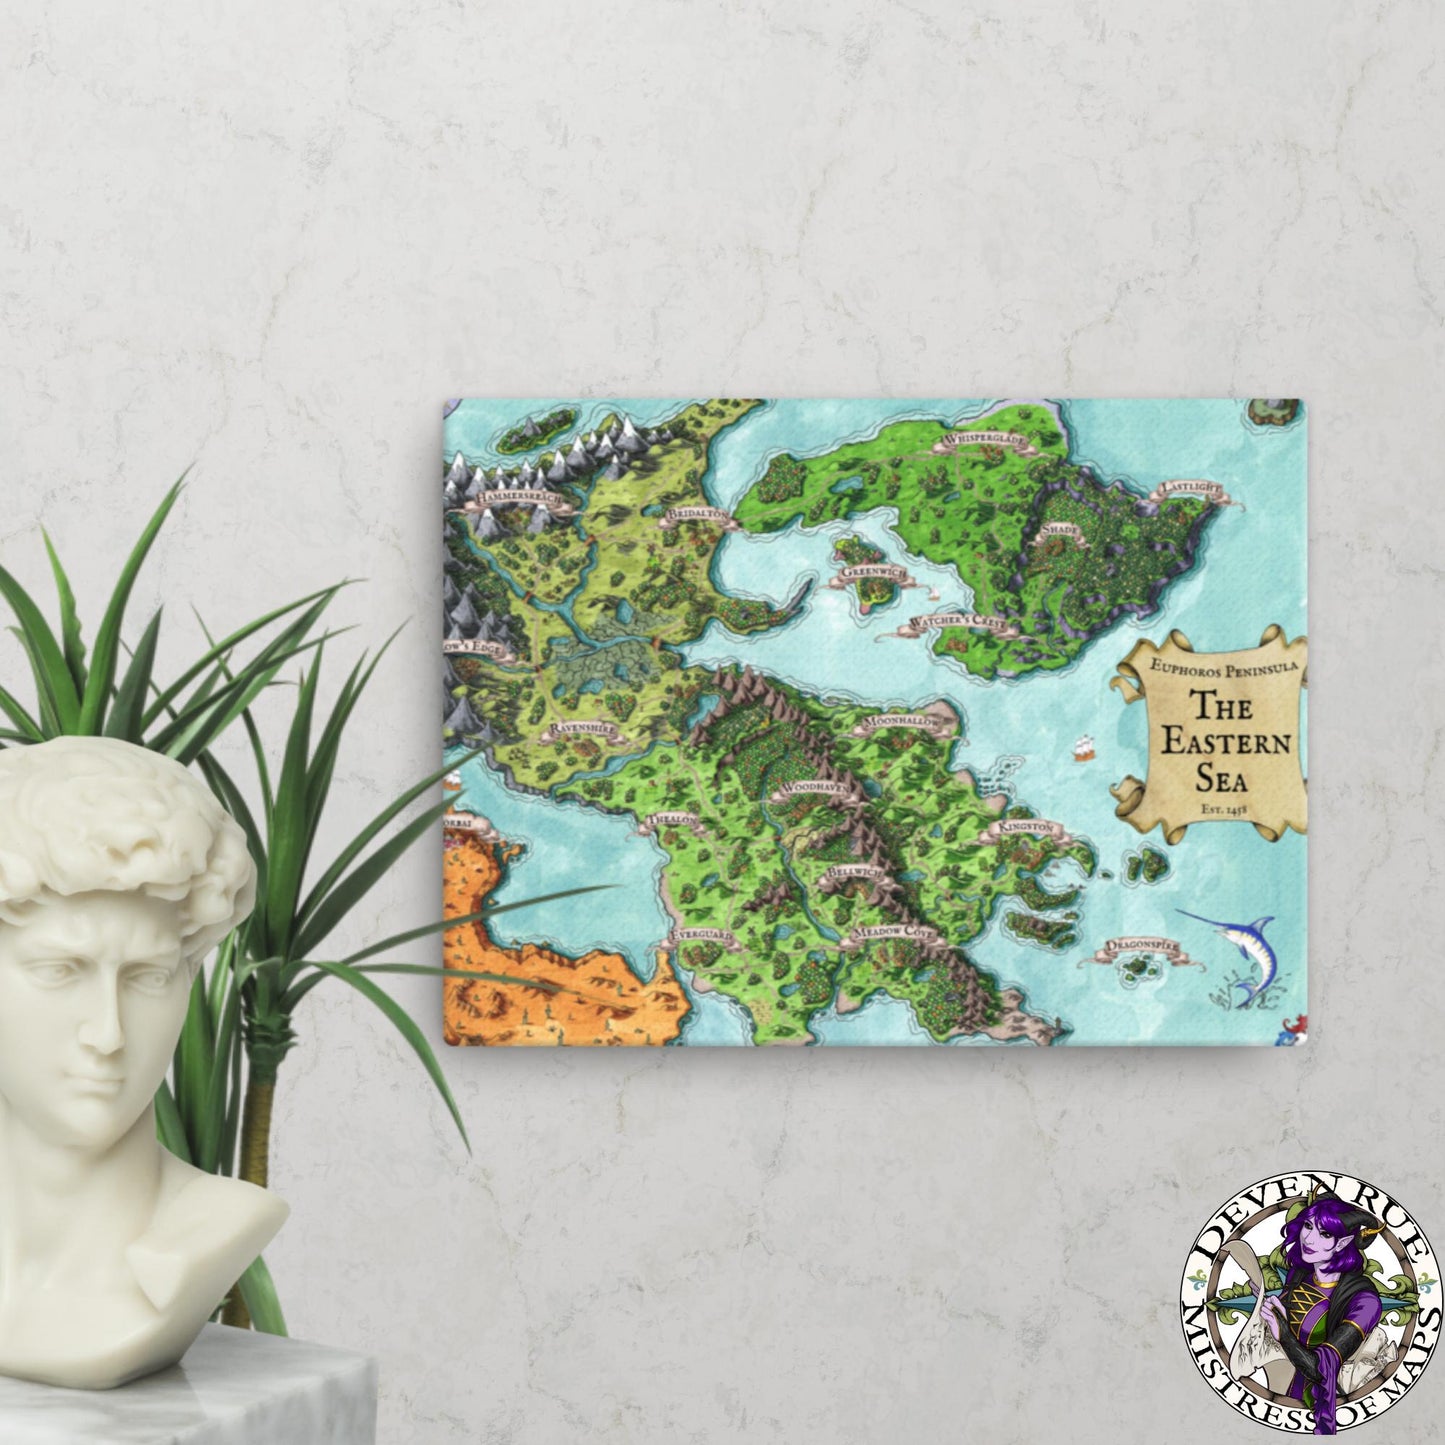 A 12" by 16" canvas print of the Euphoros map by Deven Rue hangs on a wall behind a plant and a bust statue.